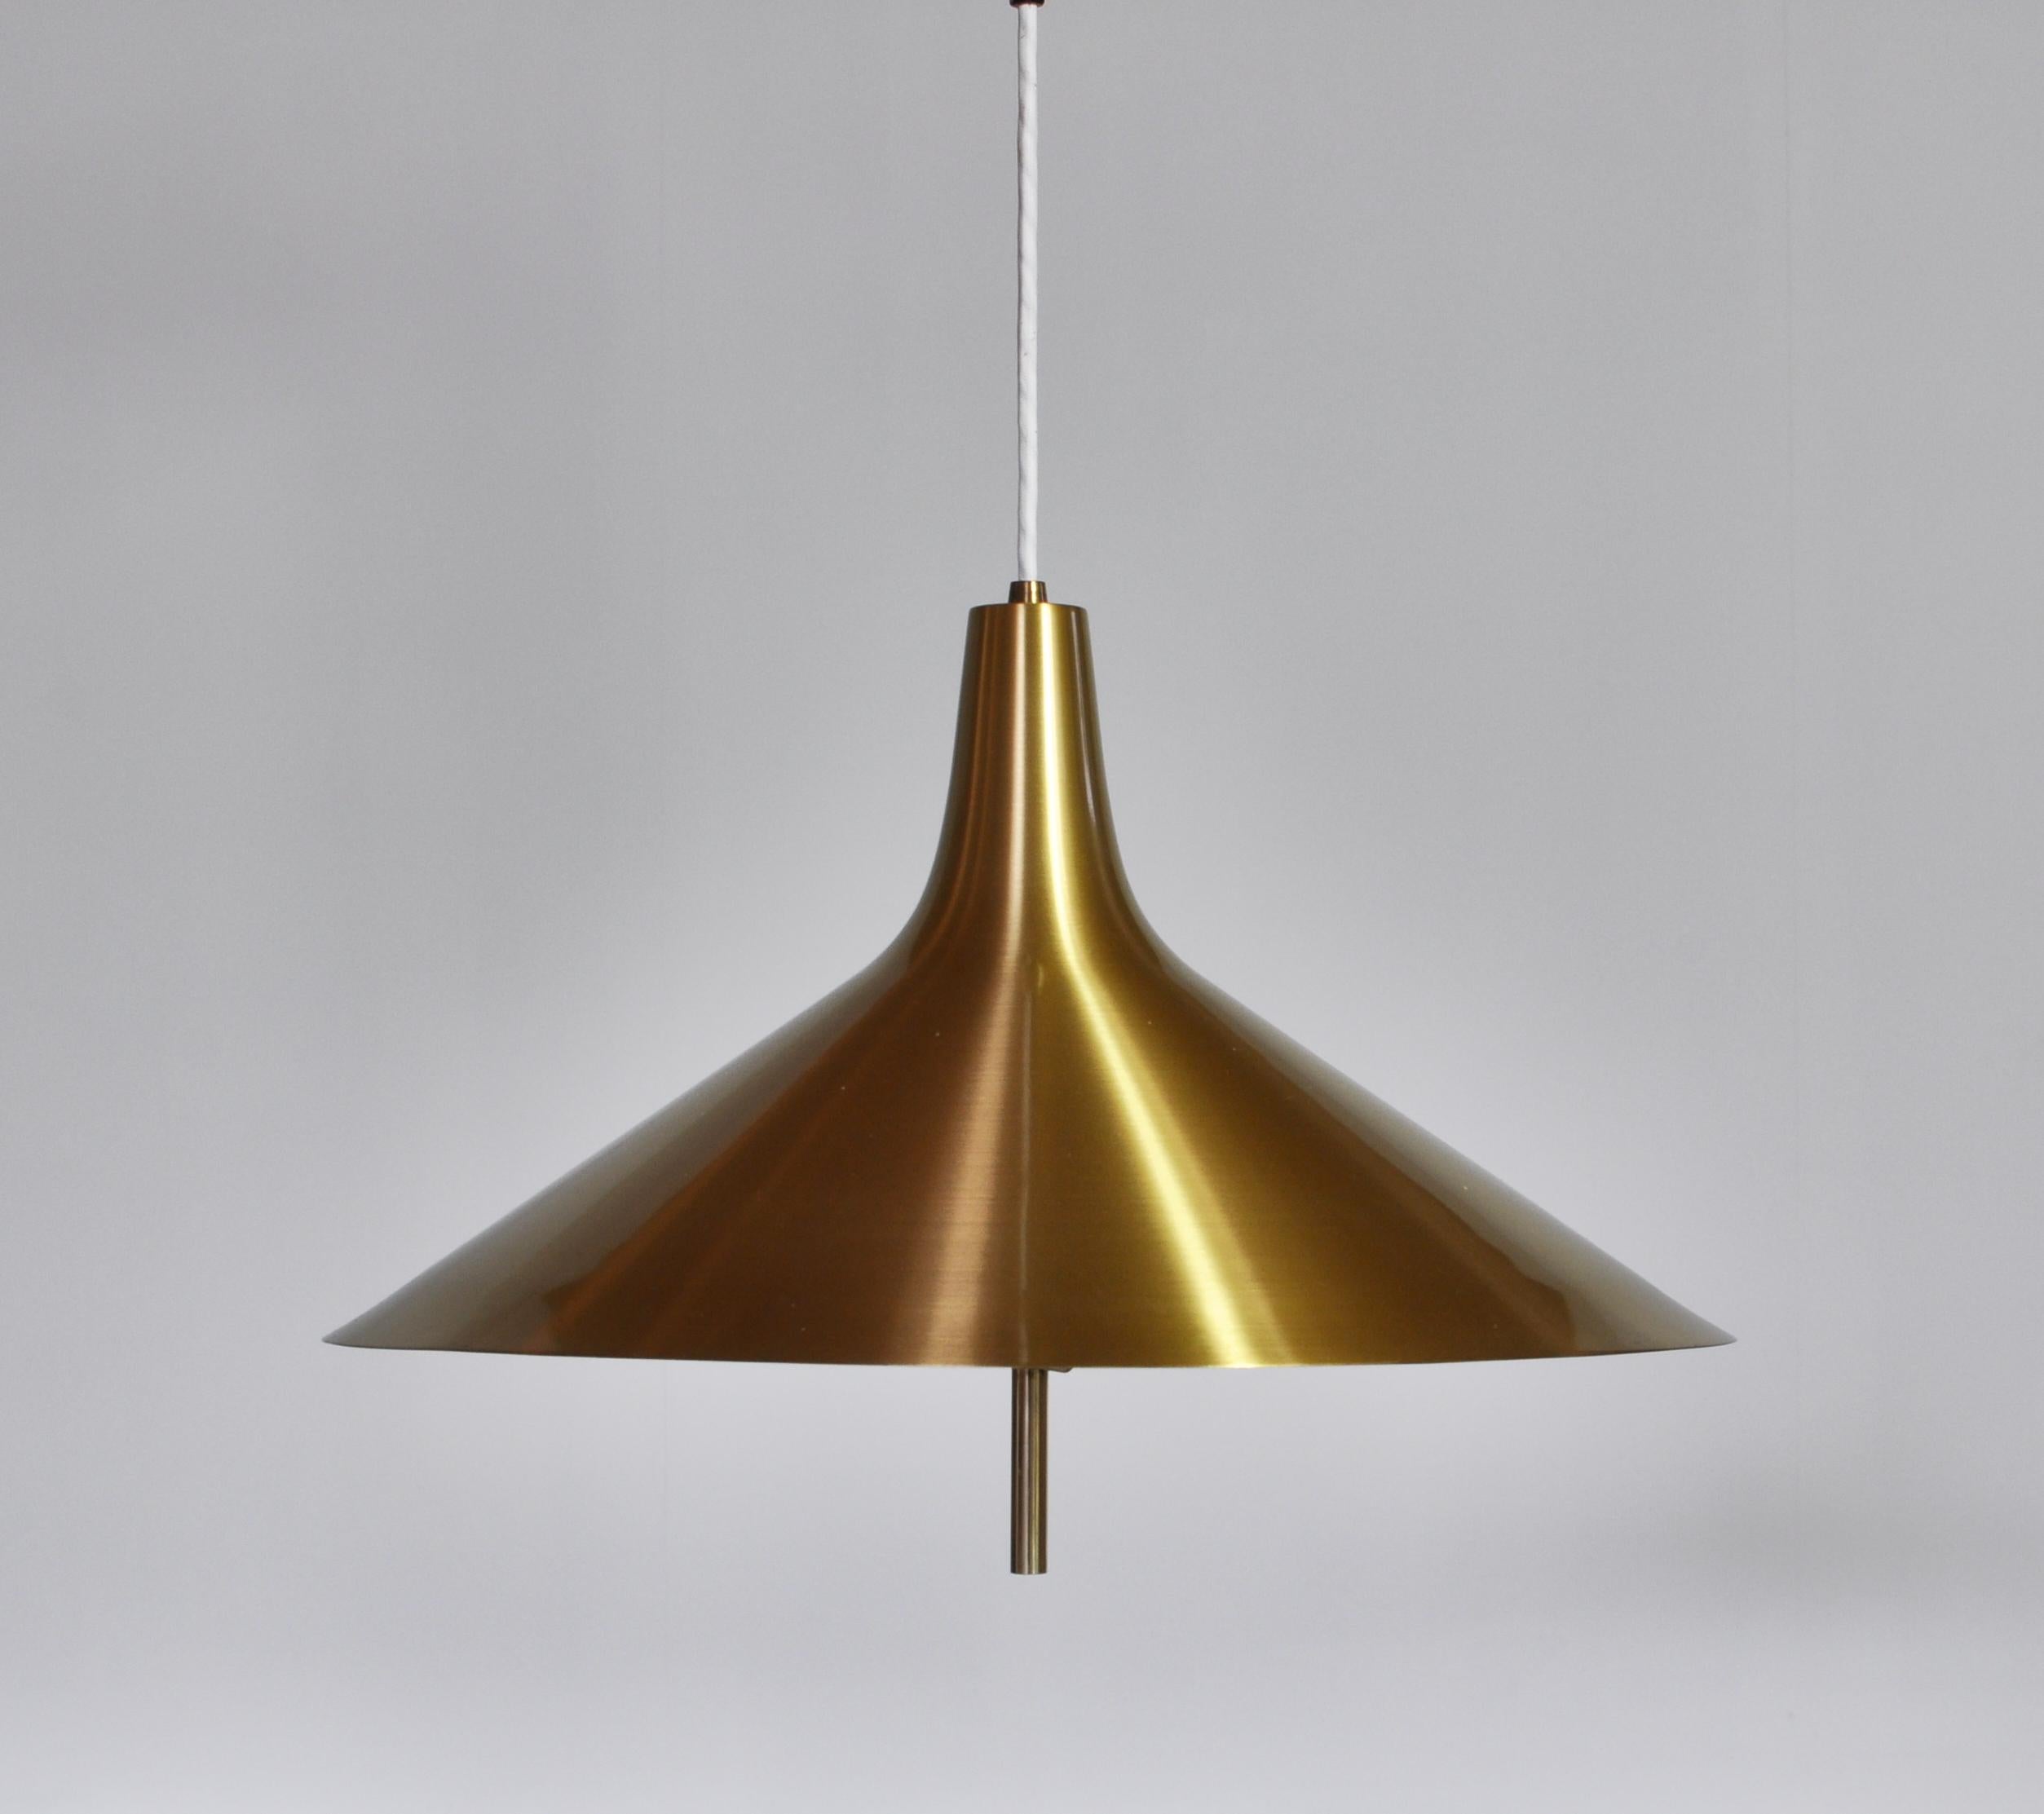 Rare and elegant brass counterweight pendant by Th. Valentiner, Copenhagen executed in solid brass. The 